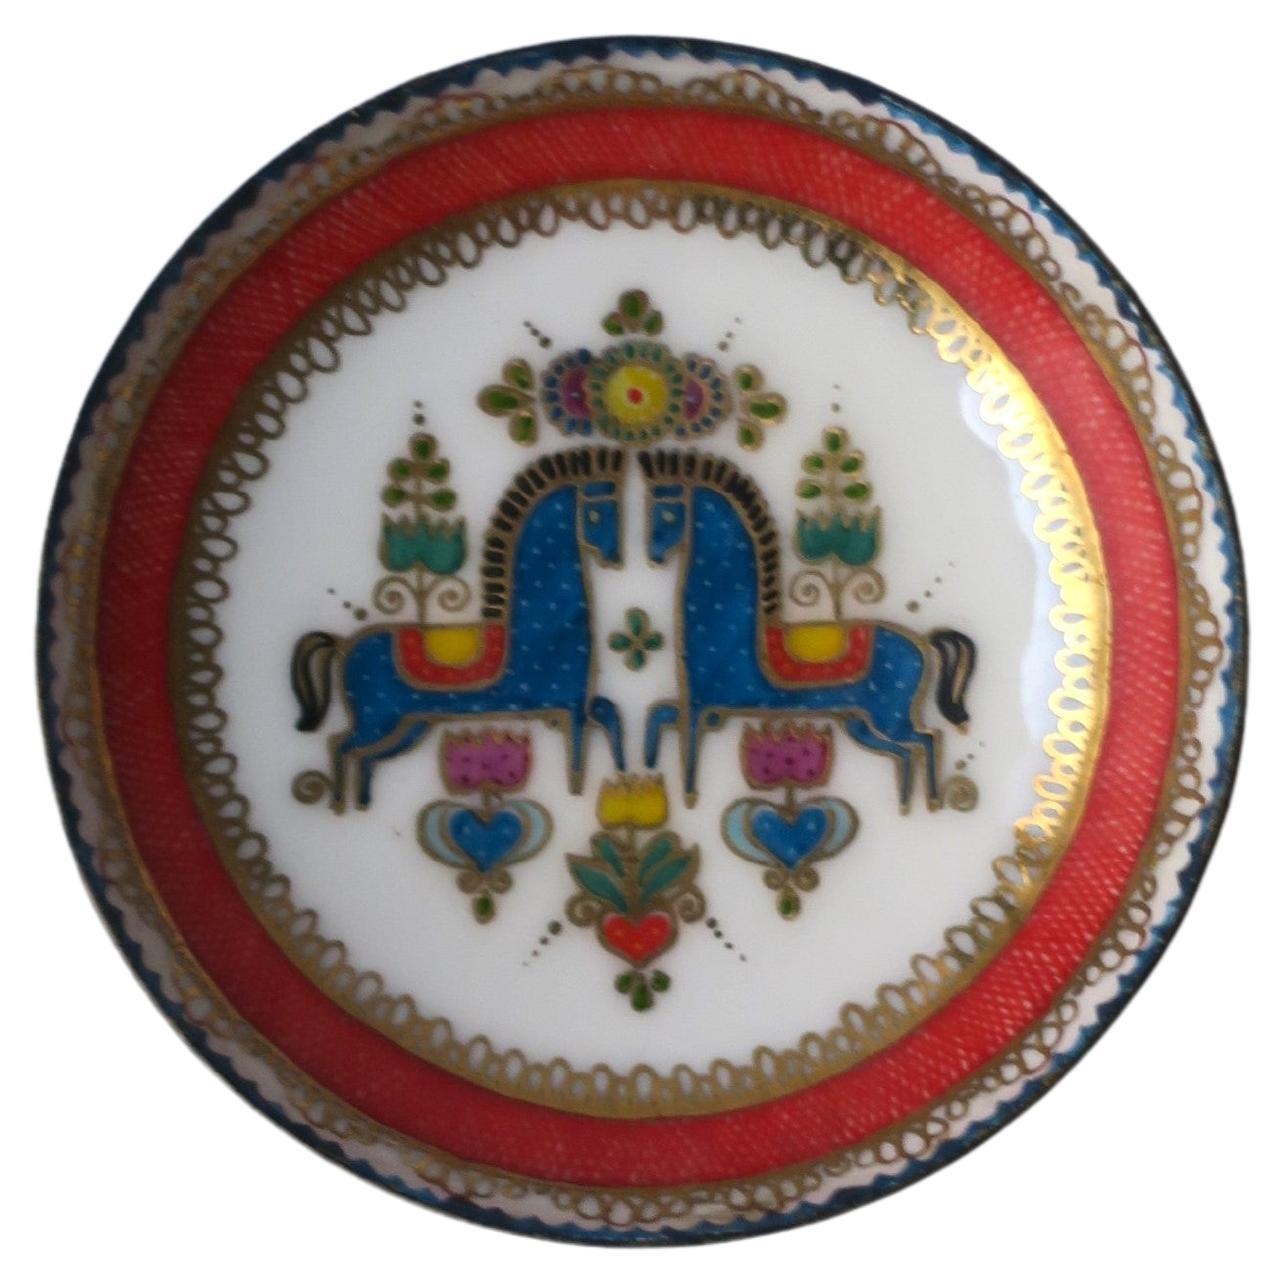 A colorful porcelain enamel Austrian small bowl or jewelry dish, circa mid-20th century, Austria. Dish, with a white enamel ground, features detailed Austrian horses at center, finished with red and gold detail around inside edge. A great piece for